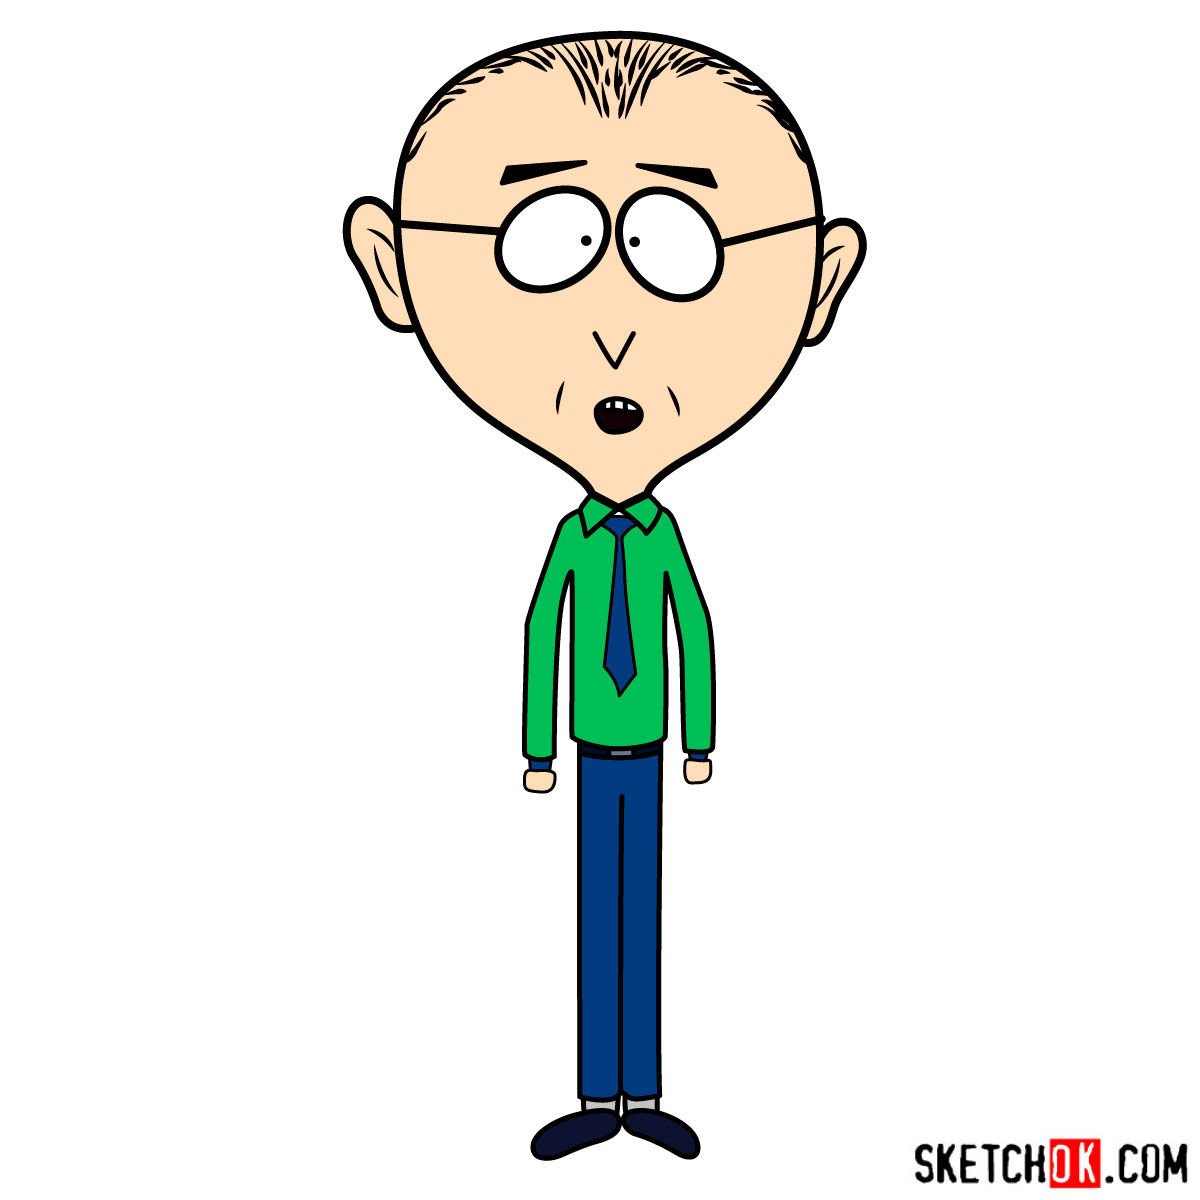 How to draw Mr. Mackey from South Park